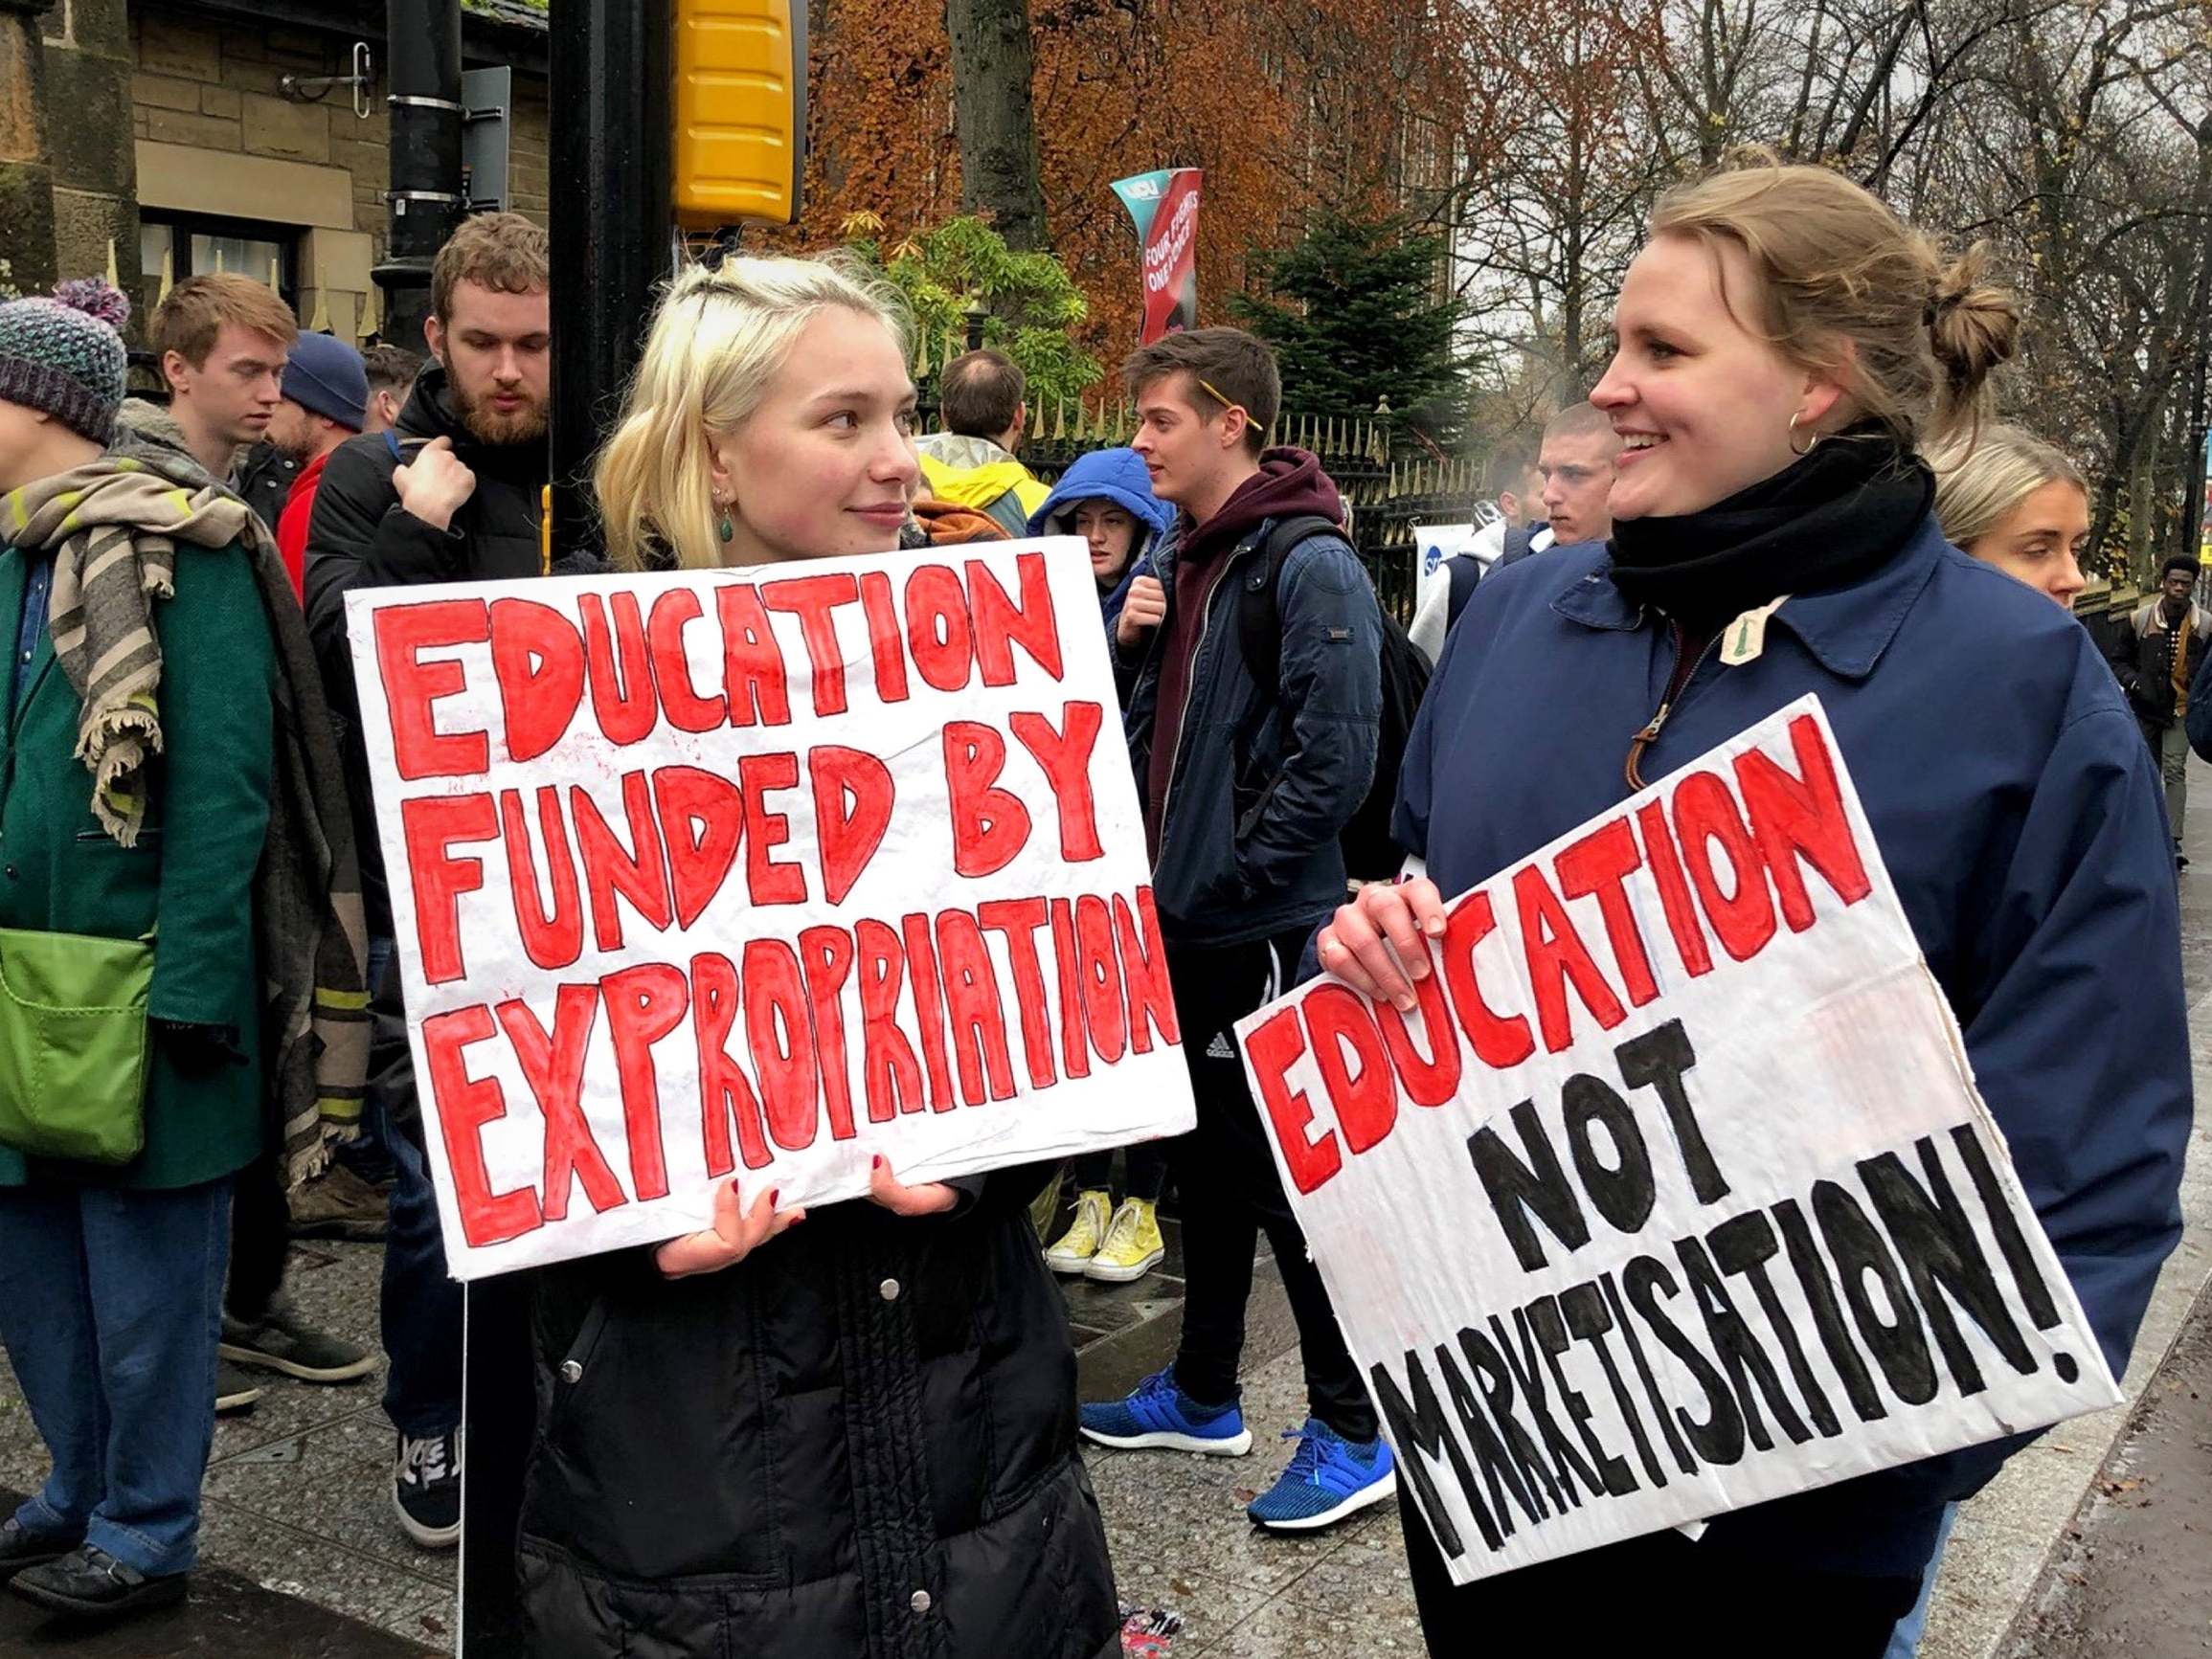 Last year, students faced eight more days of strike action at 60 universities over pensions, pay and working conditions and a further 14 days of walkouts have taken place in recent weeks